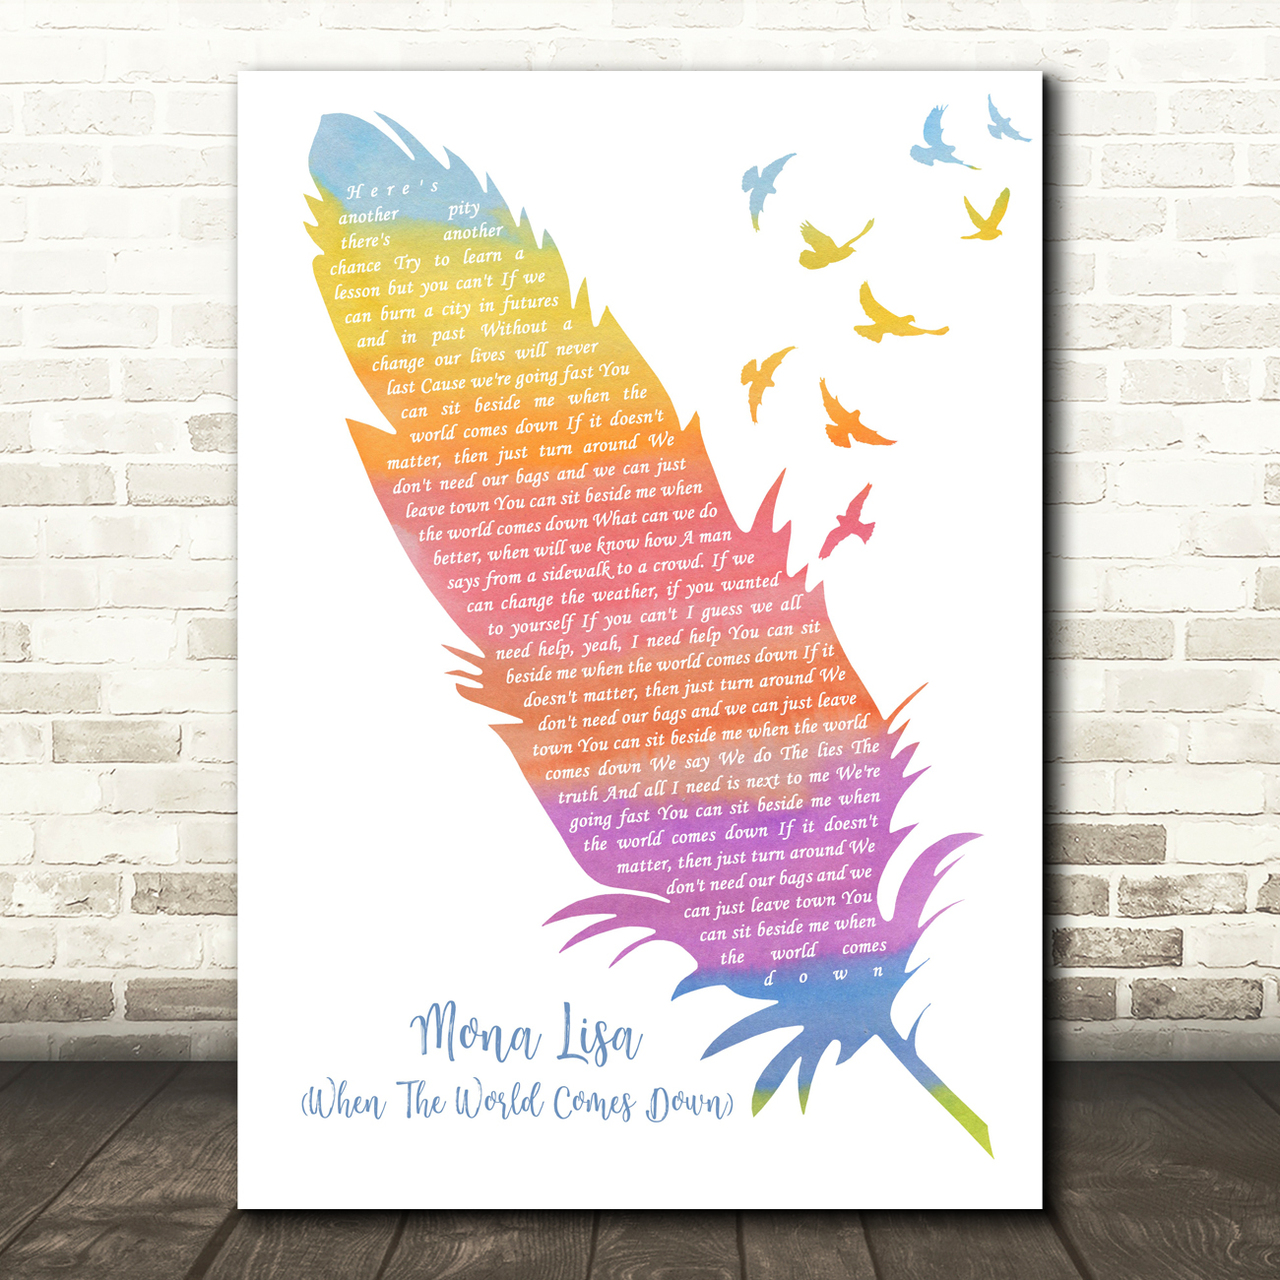 The All-American Rejects Mona Lisa (When The World Comes Down) Watercolour Feather & Birds Song Lyric Art Print